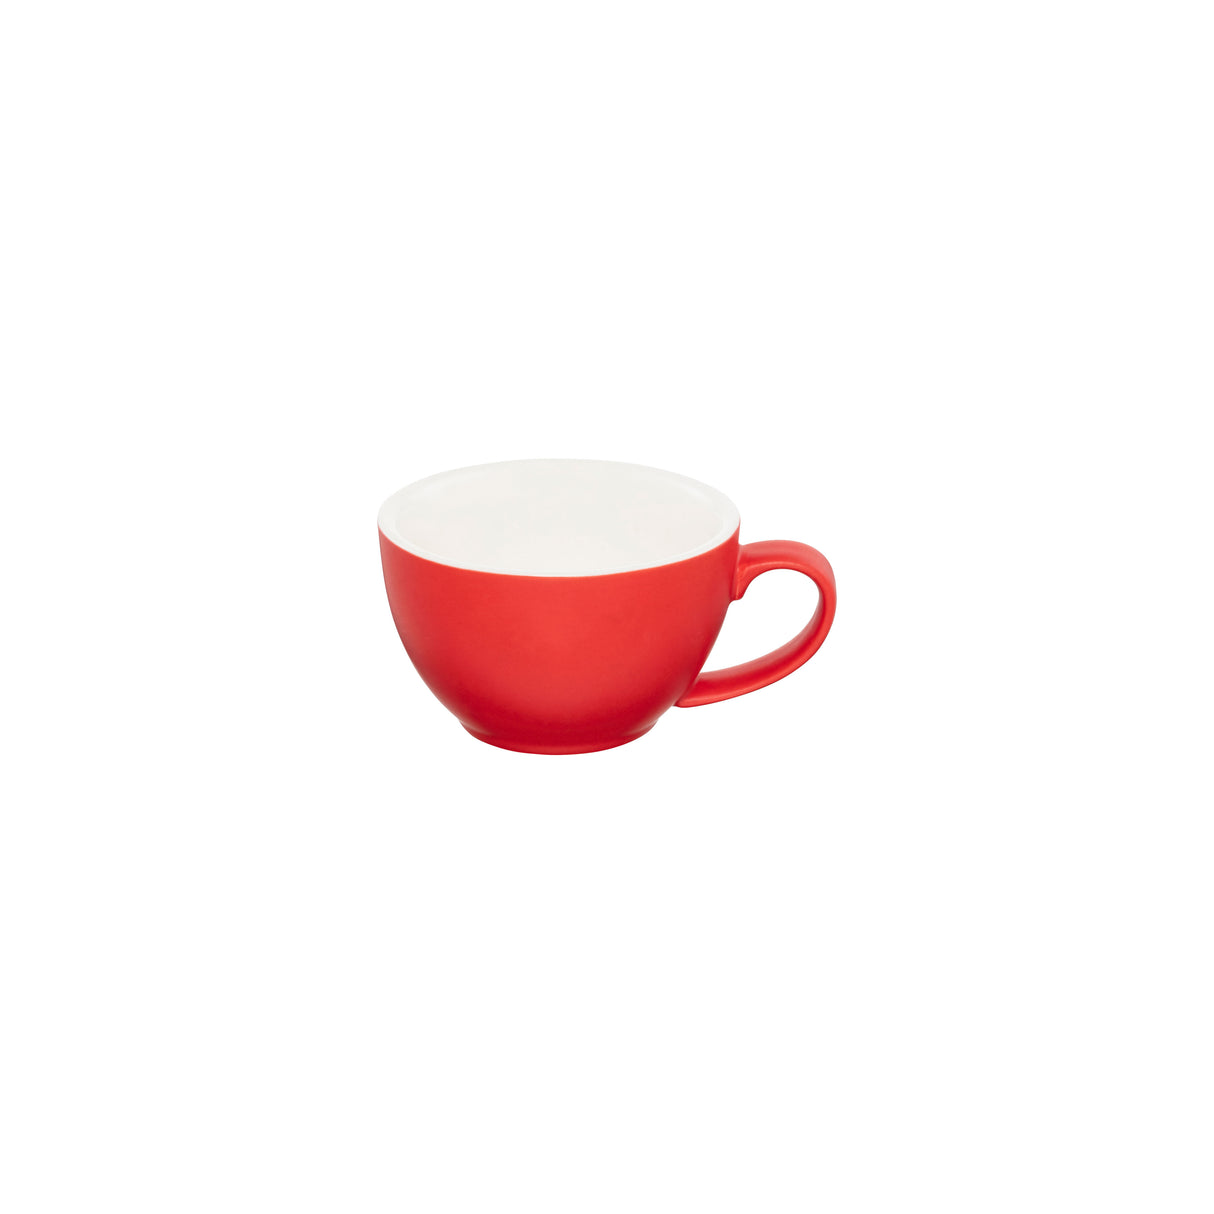 Megaccino Cup - Rosso, 280ml, Intorno: Pack of 6